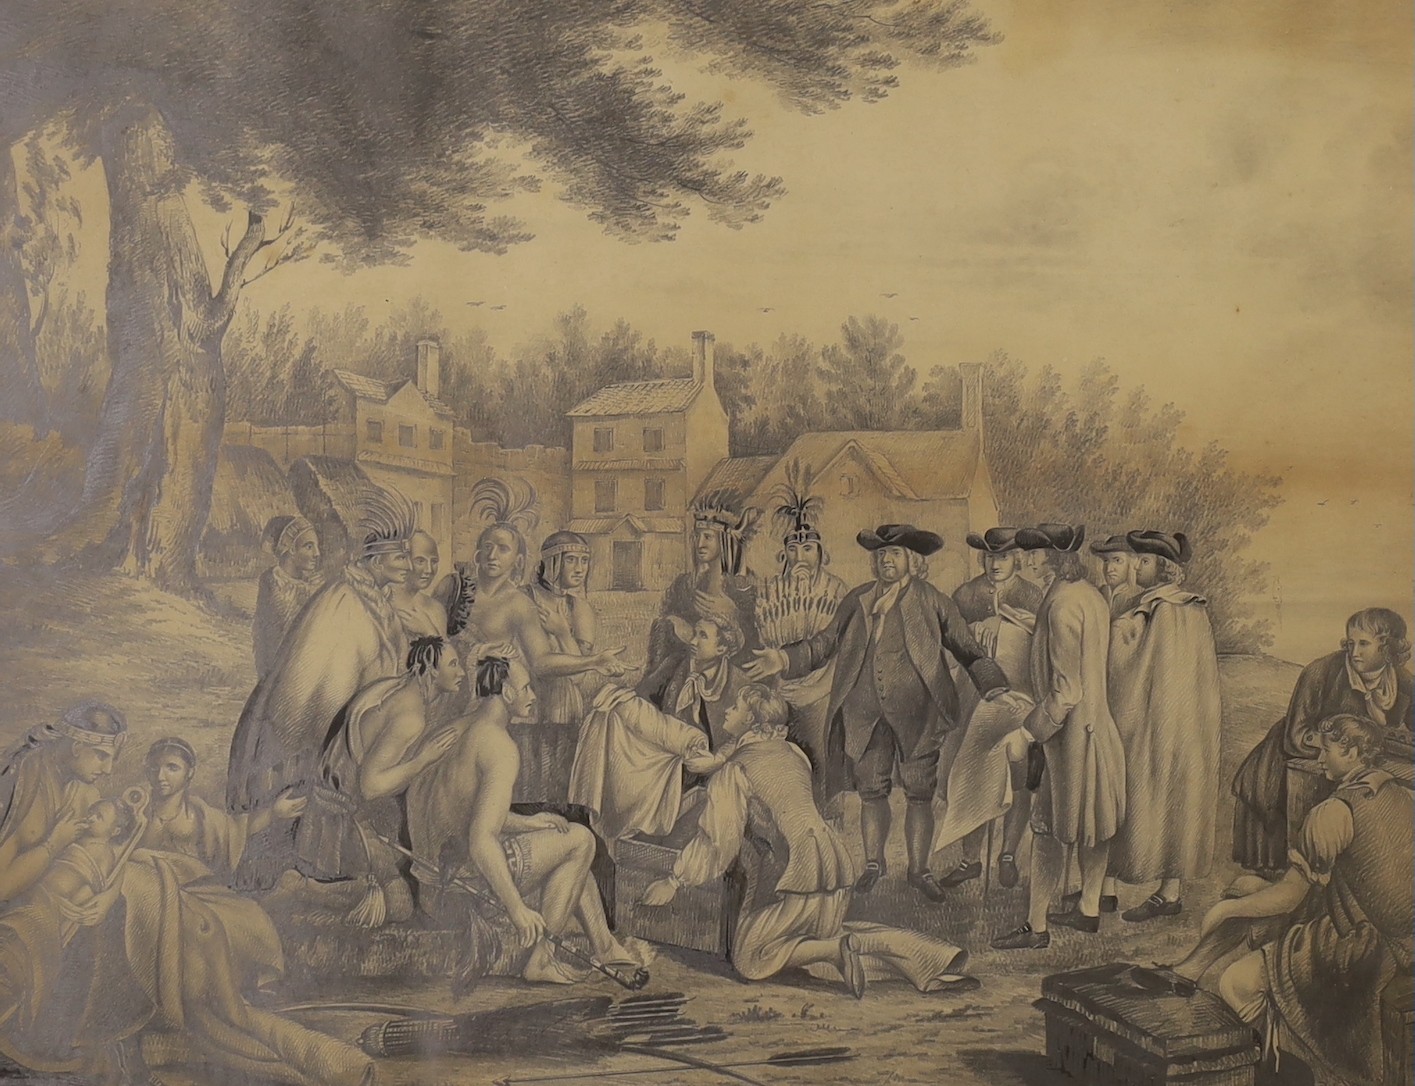 After Benjamin West, pencil drawing, Penn's Treaty with the Indians, 41 x 53cm